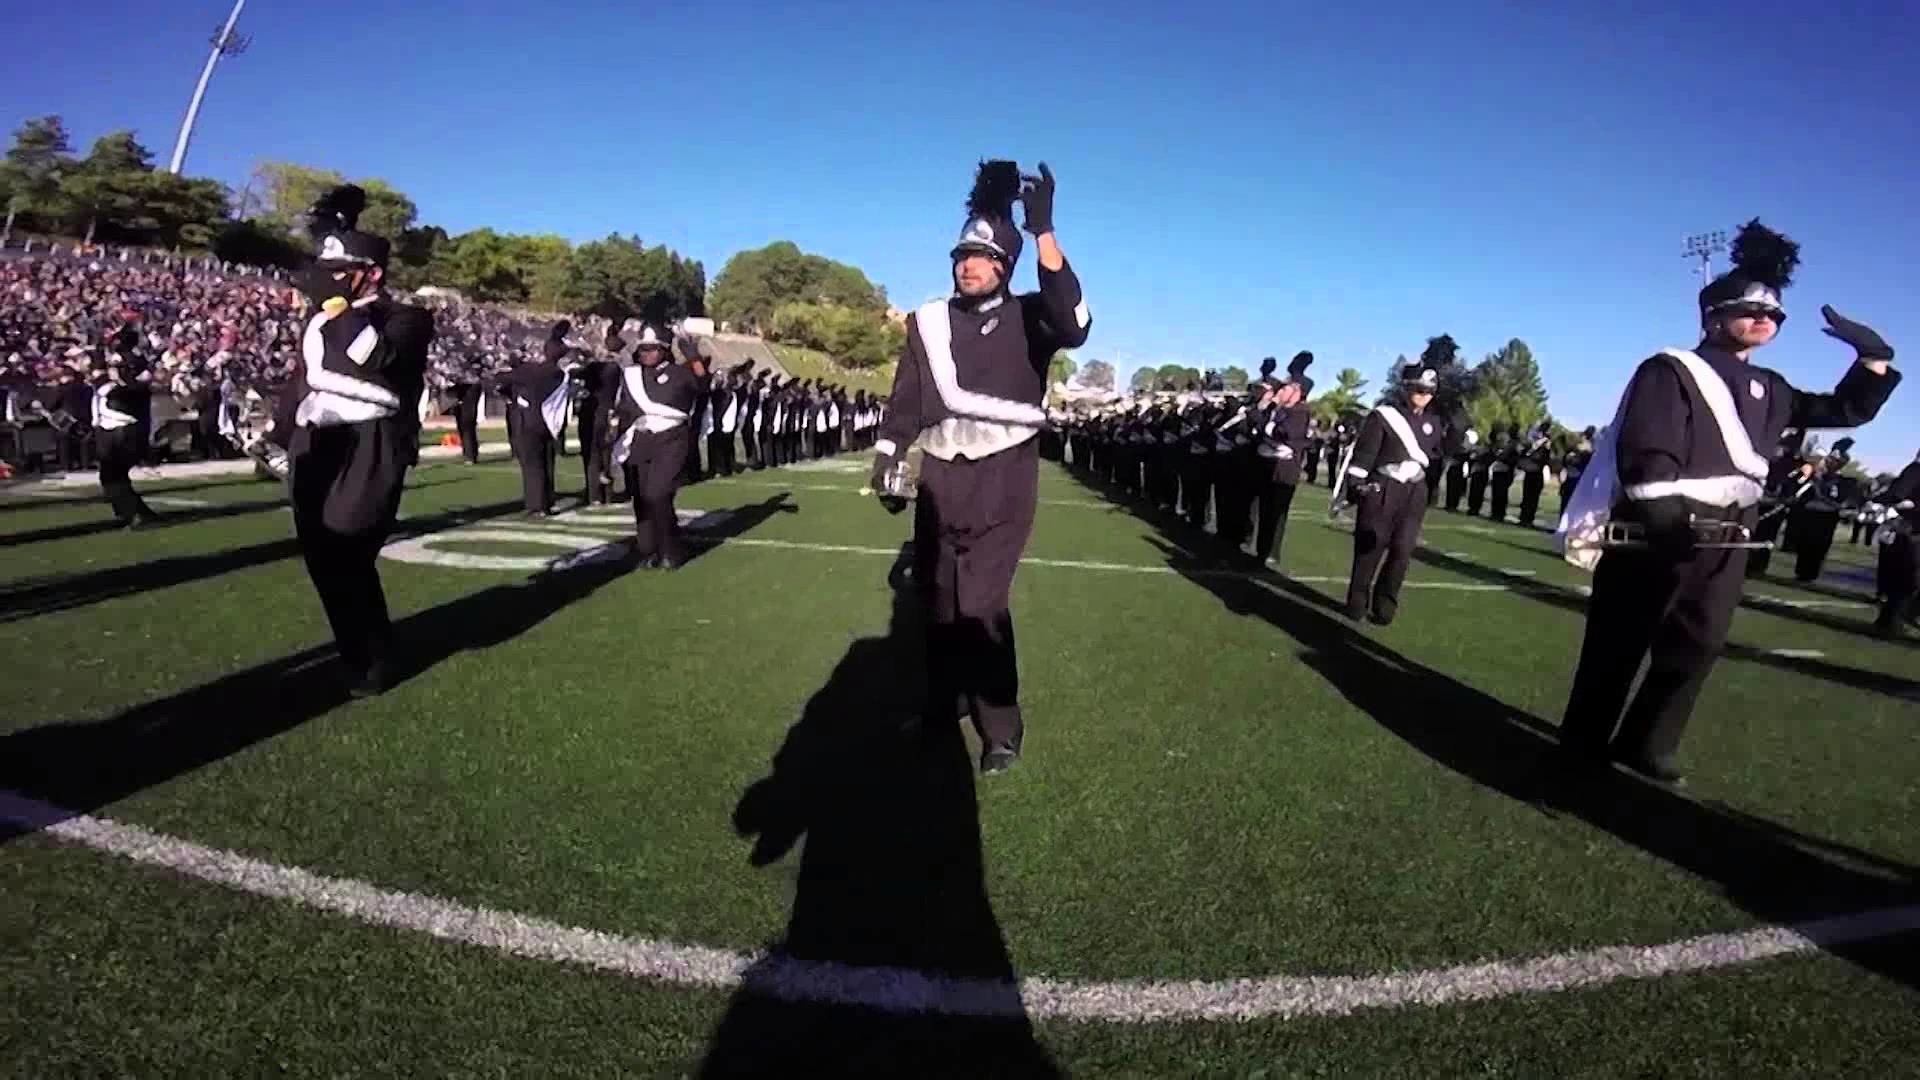 1920x1080 UConn Marching Band - Dance 2015 - Allentown Exhibition